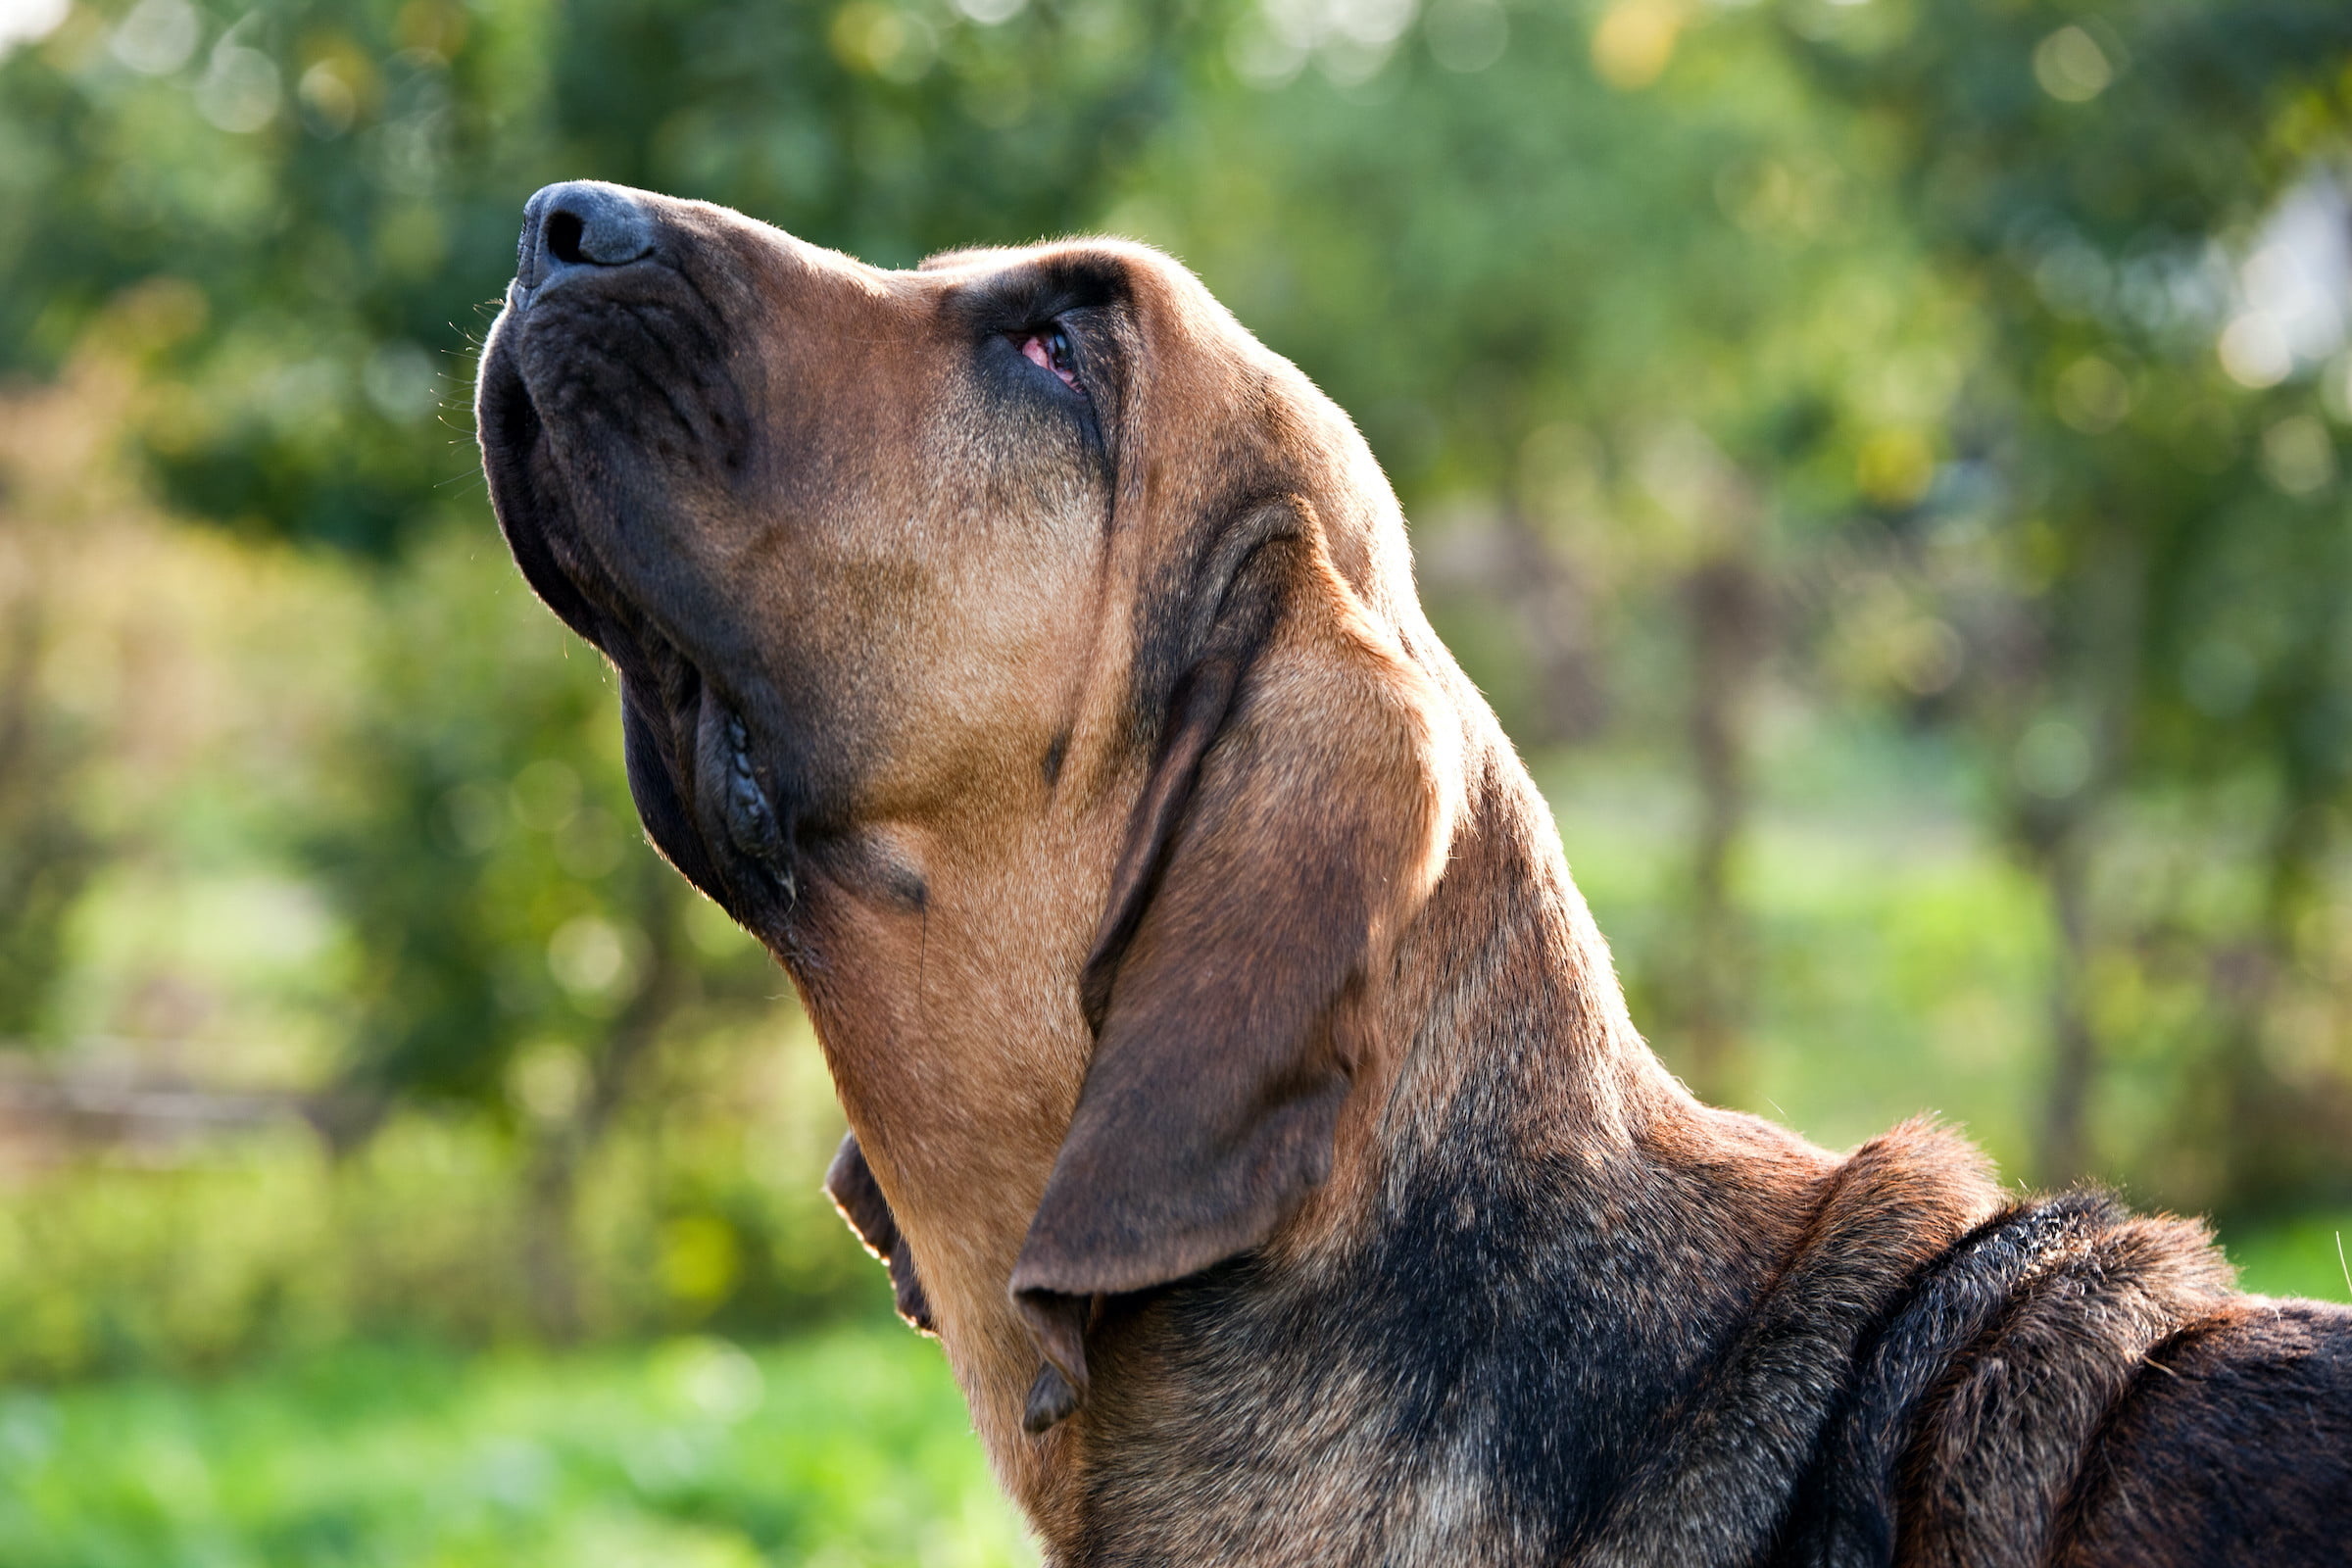 Bloodhound, Dog treats under $15, Pawtracks recommendations, Canine nutrition, 2400x1600 HD Desktop